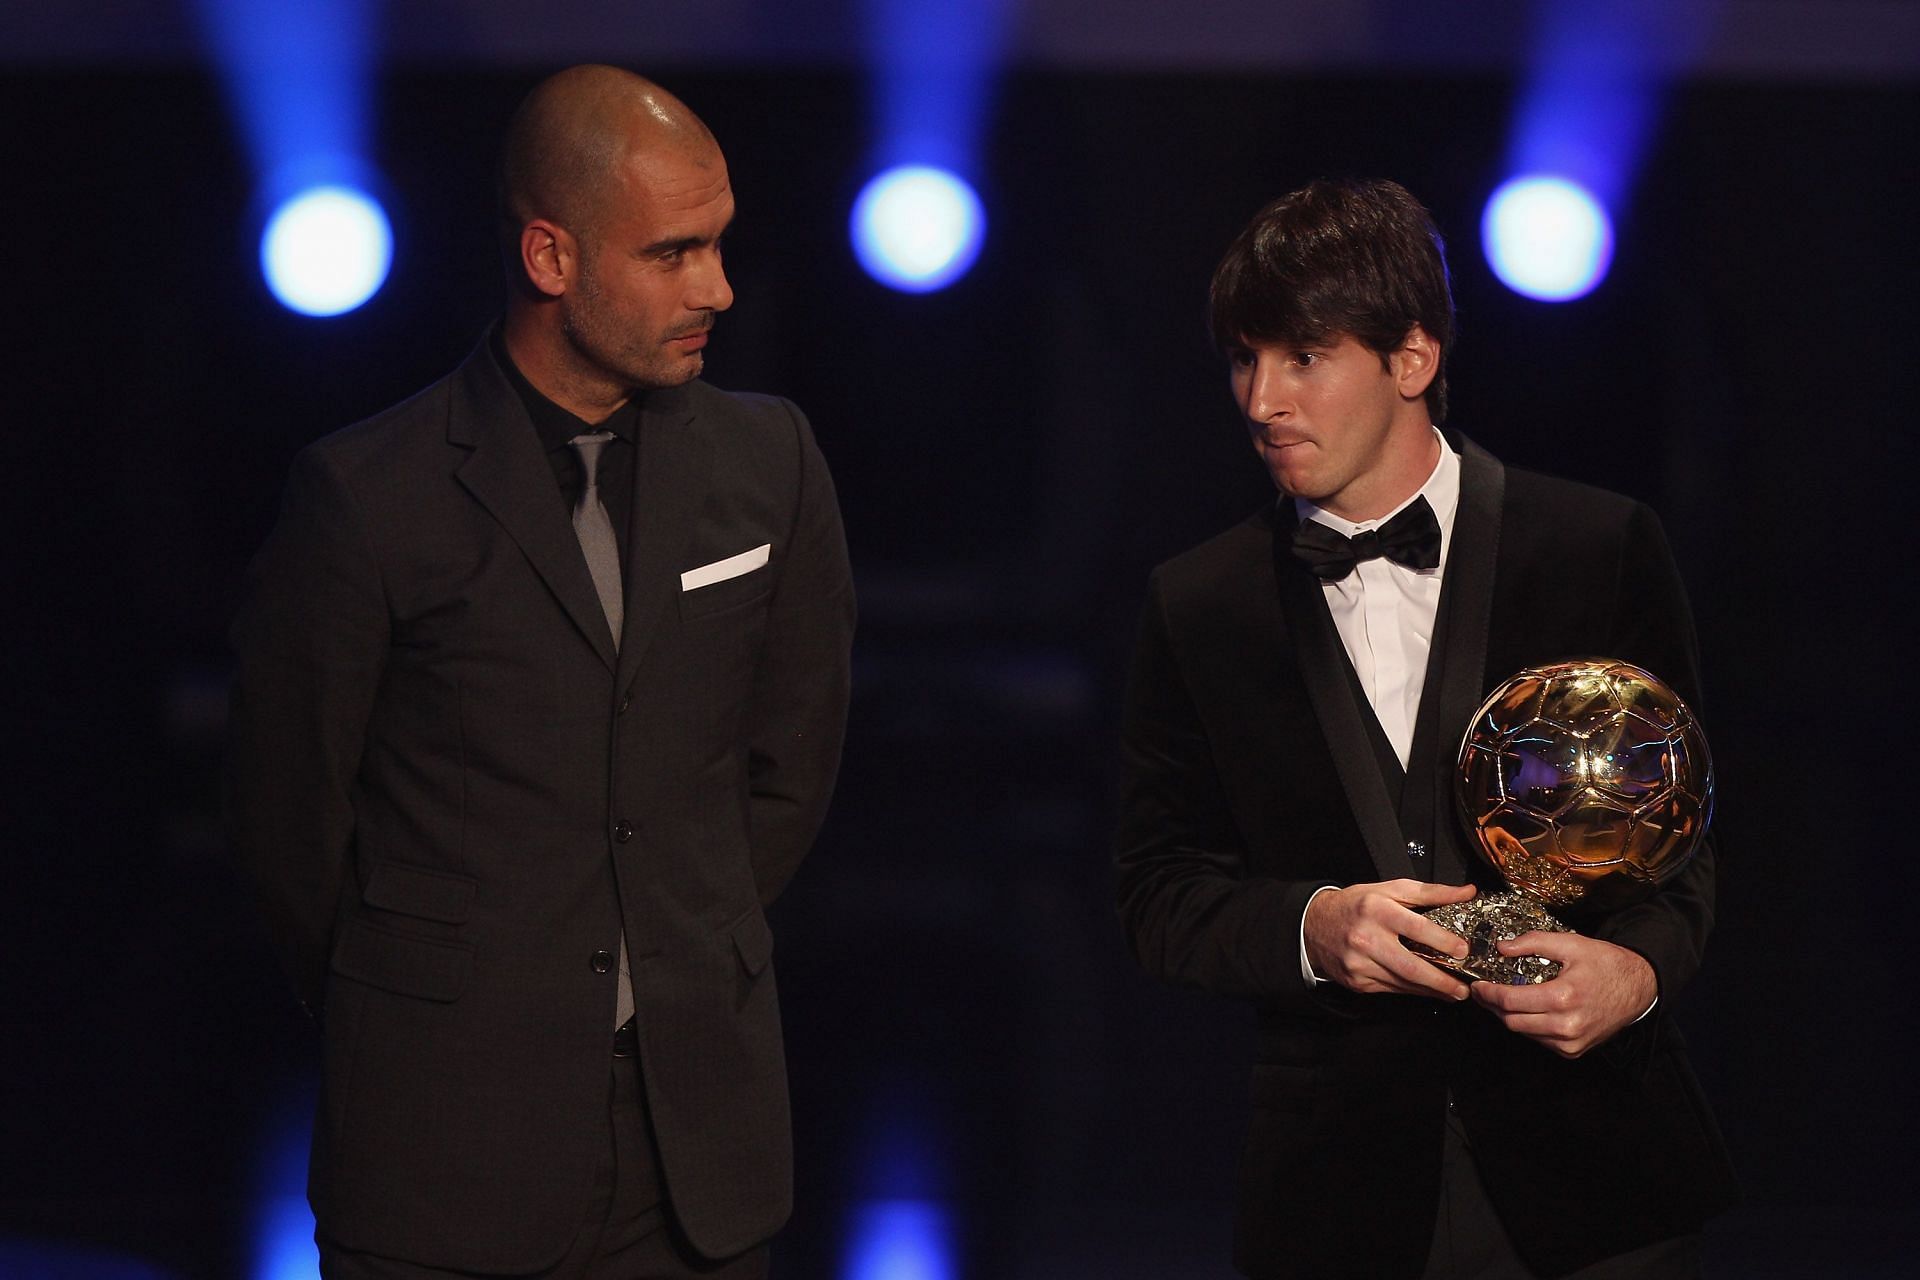 Pep Guardiola presented the award to Messi at the Ballon d&#039;Or Gala in 2010.